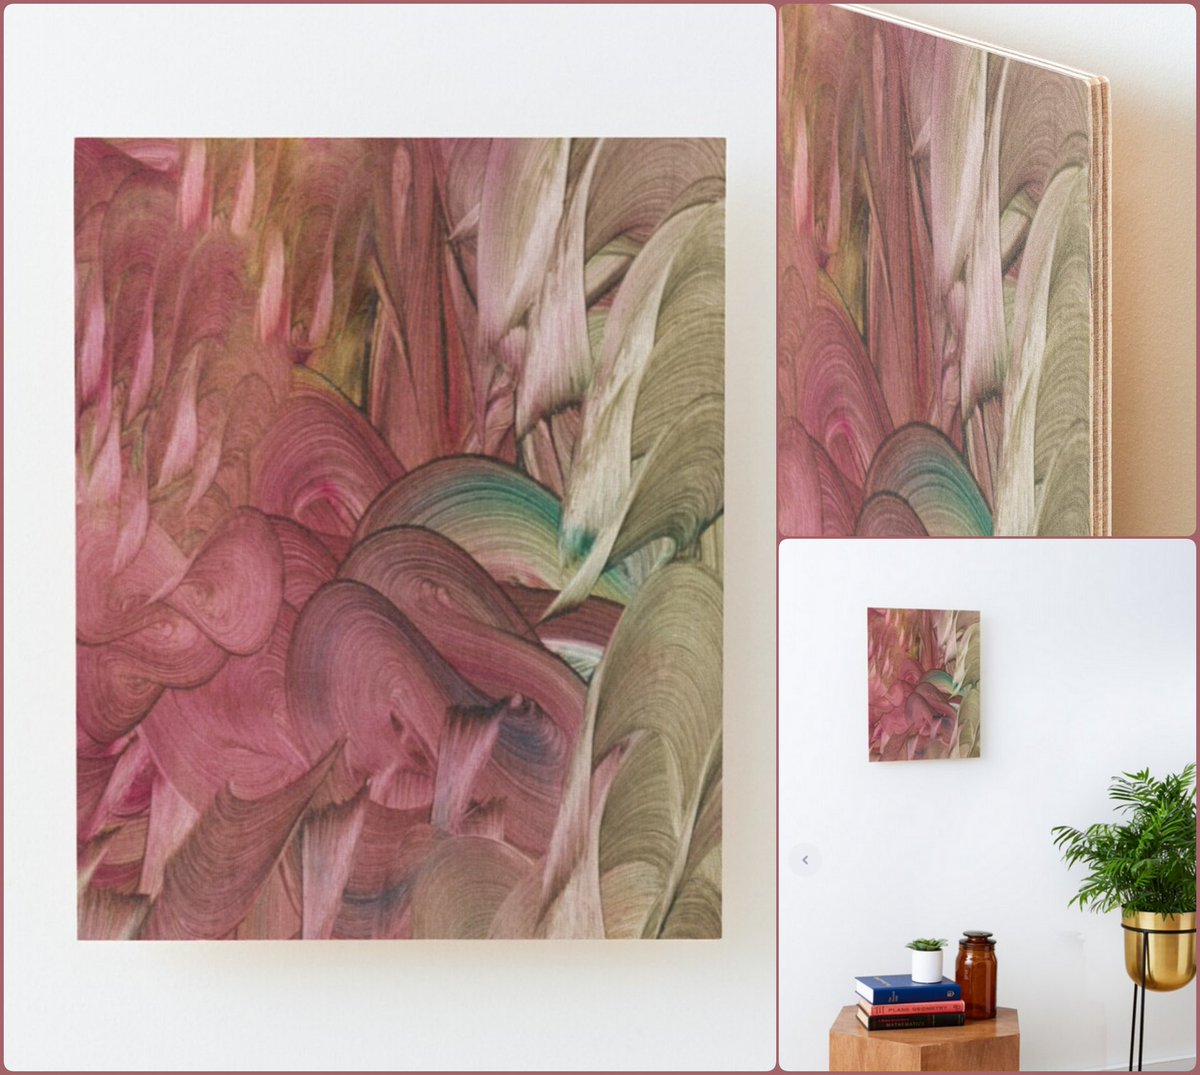 Divine Essence Mounted Print~by Art Falaxy
~The Art of Uniqueness!~ #accents #wall #art #artfalaxy #canvas #framed #metal #posters #prints #redbubble #tapestry #wood #trendy #modern #FindYourThing #pink #red #white

redbubble.com/i/wood-print/D…